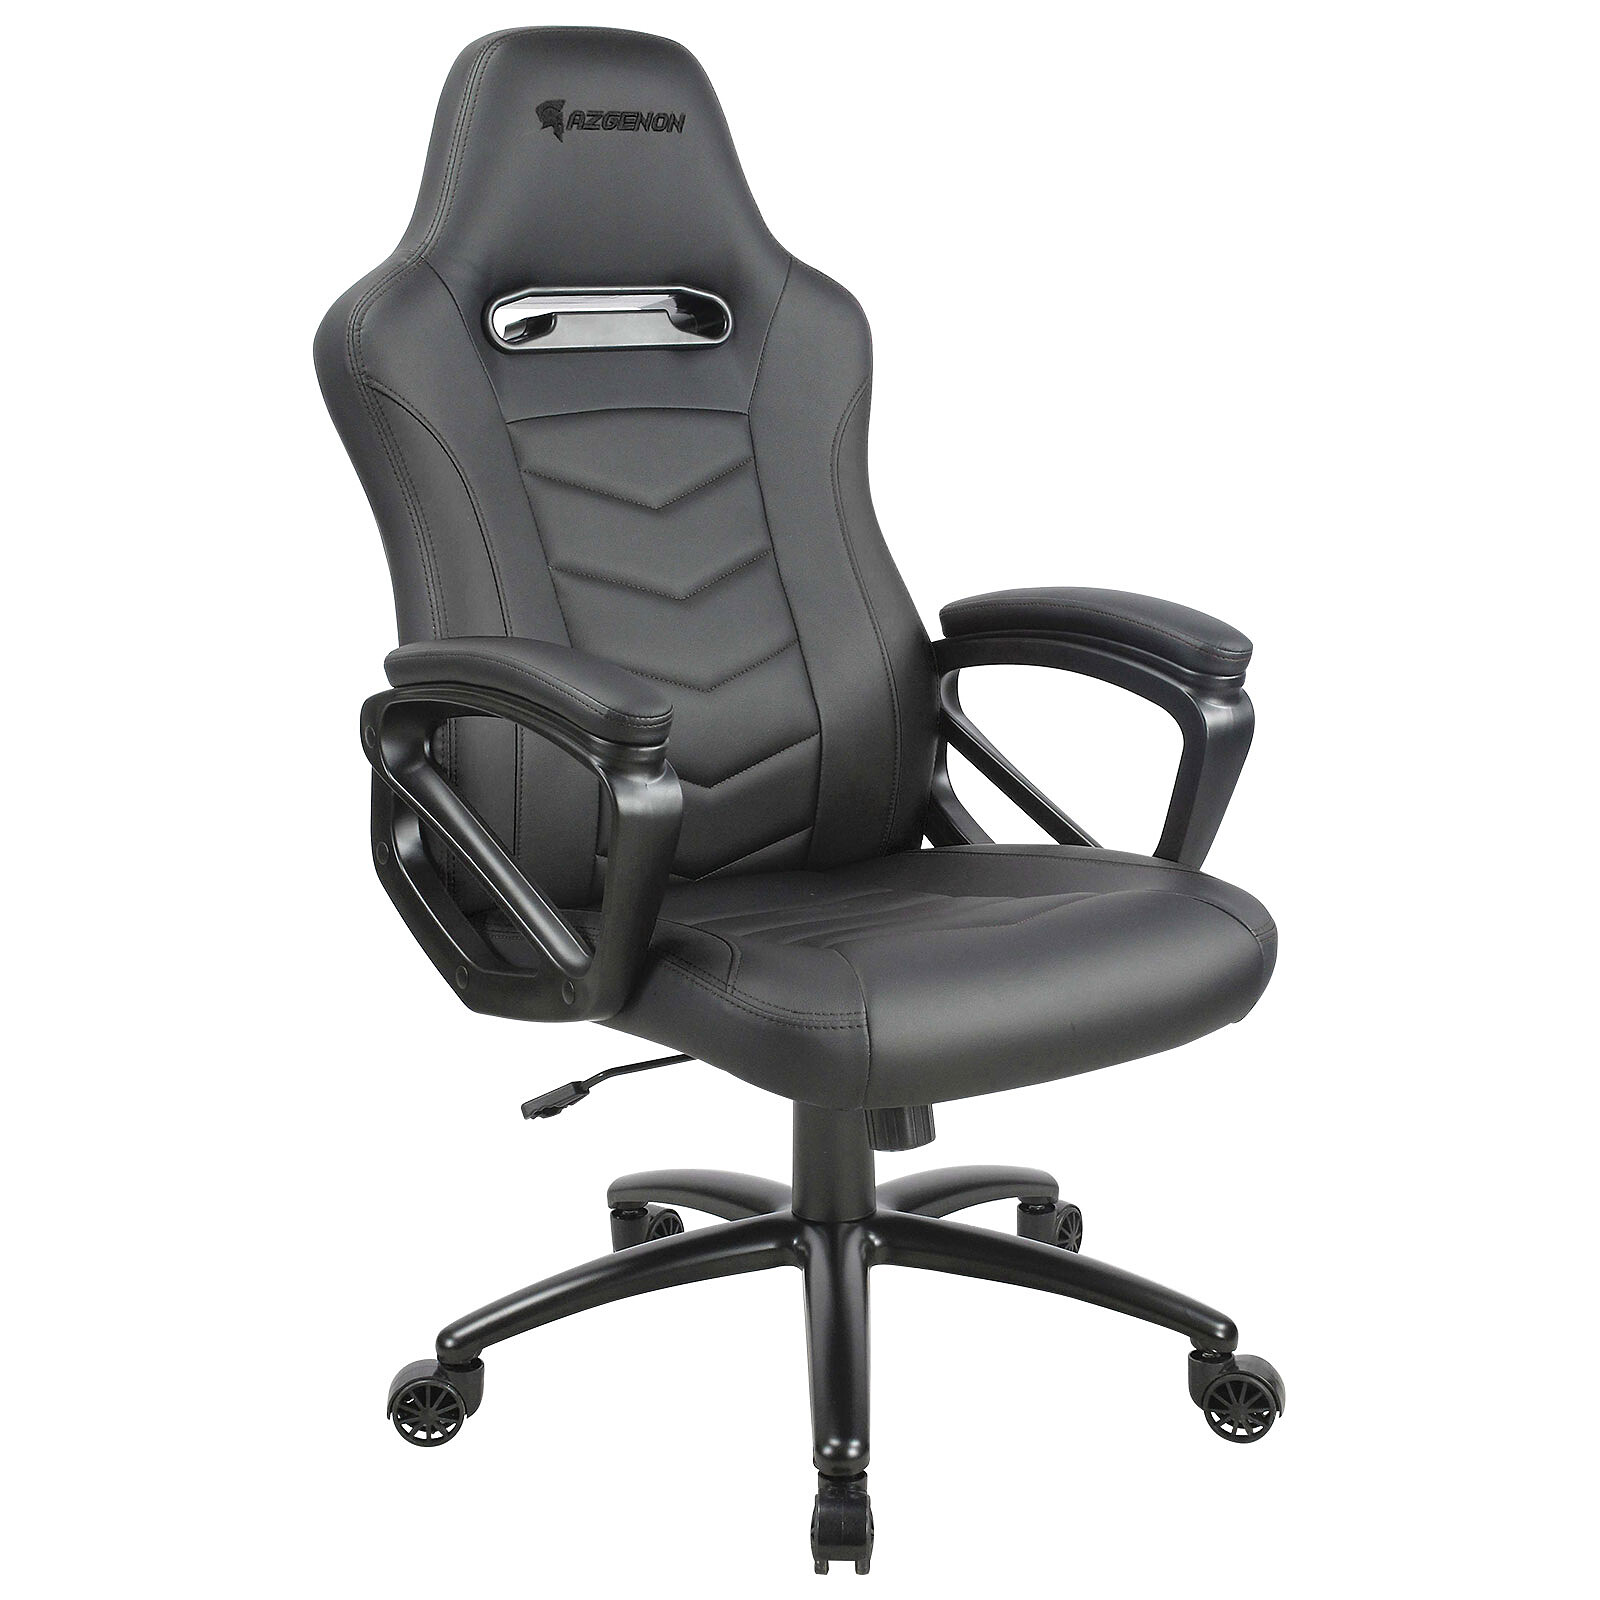 Iron Maiden - Siege gamer taille L - Fauteuil gamer - LDLC